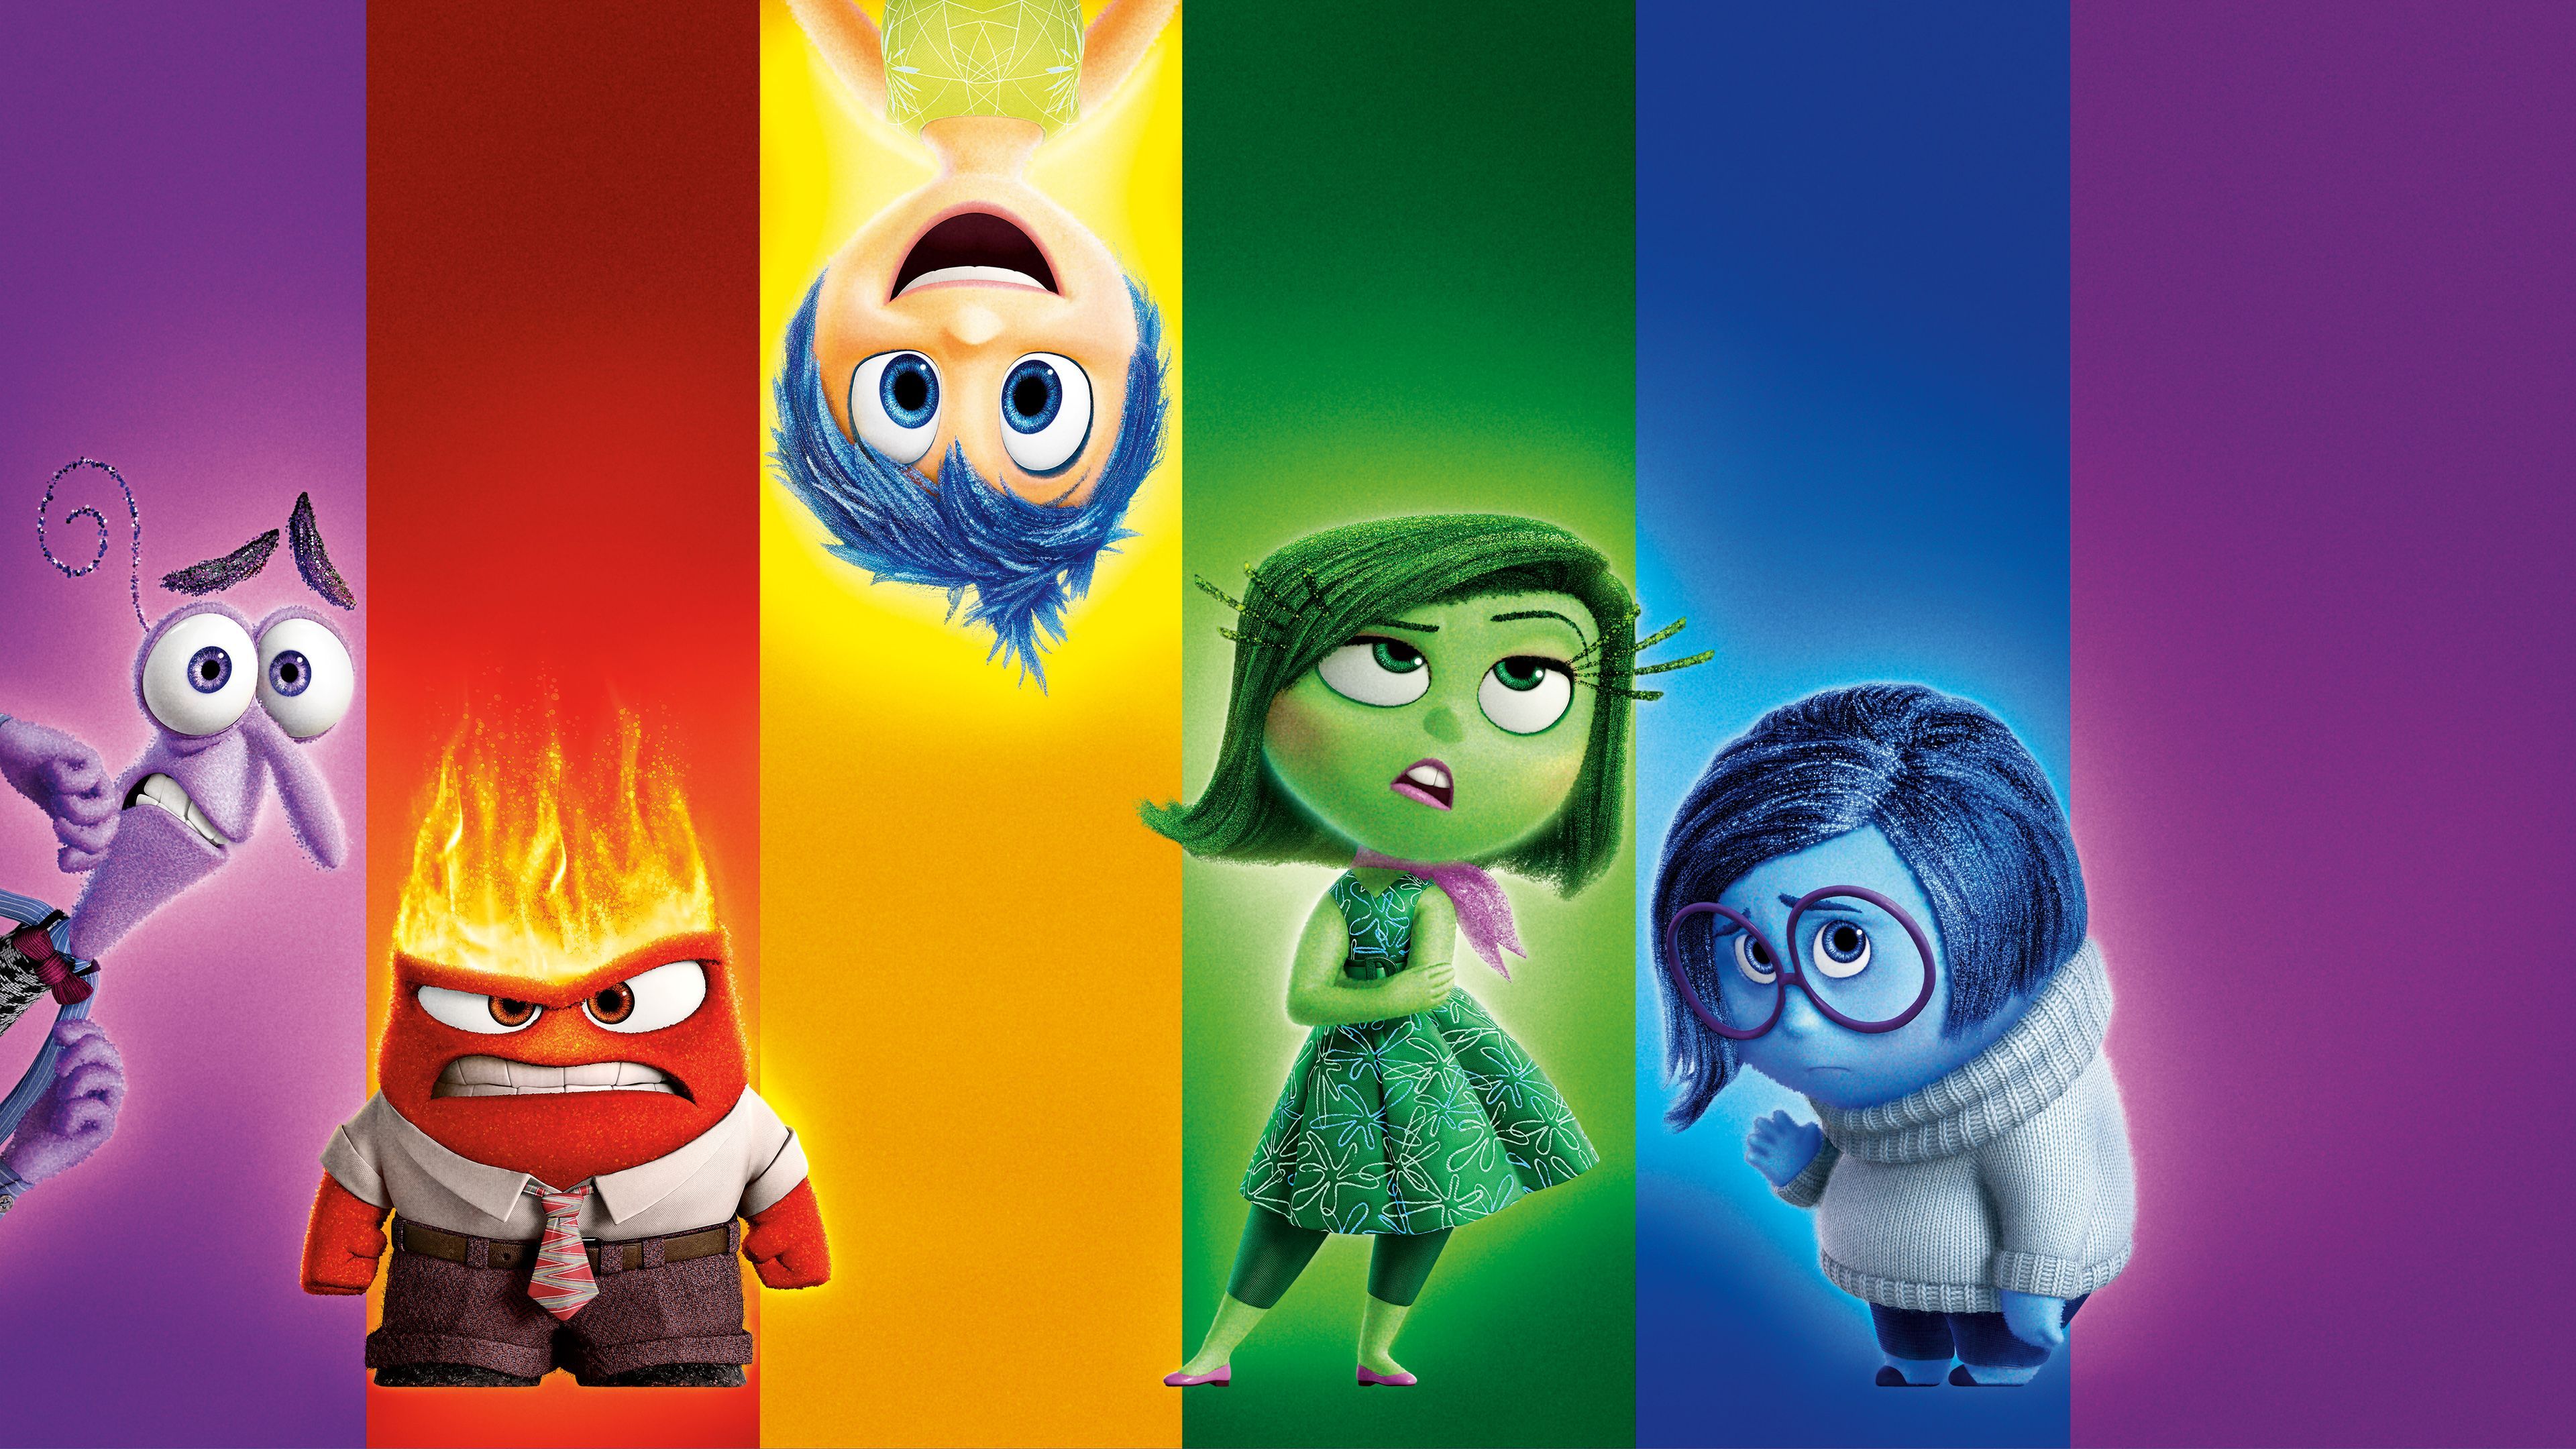 Inside Out Movie Wallpaper. Movie inside out, Kid movies, Animated movies